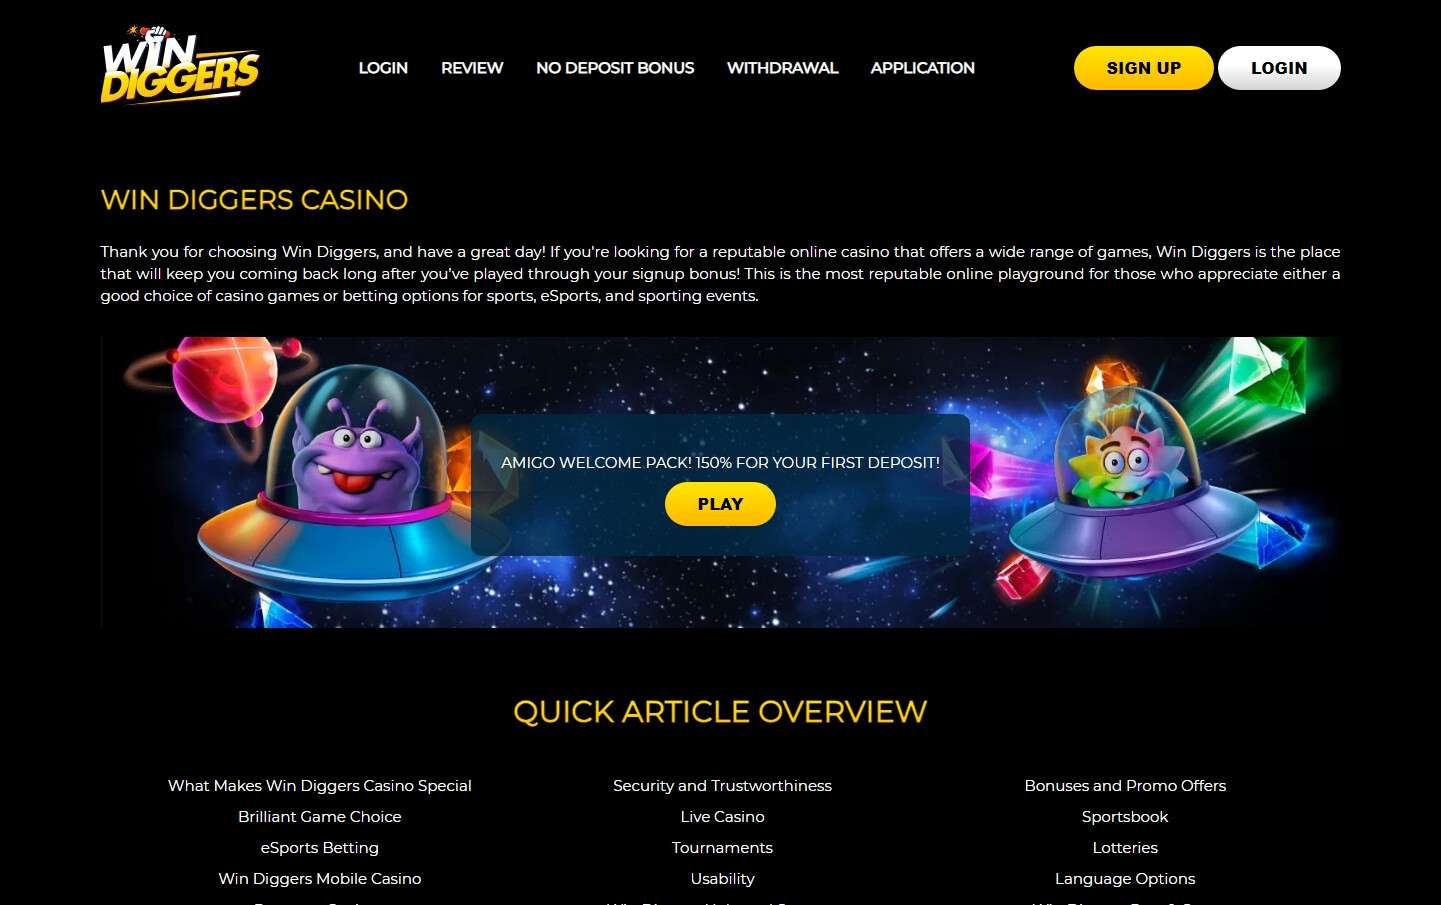 Win Diggers Casino Licensing and Security